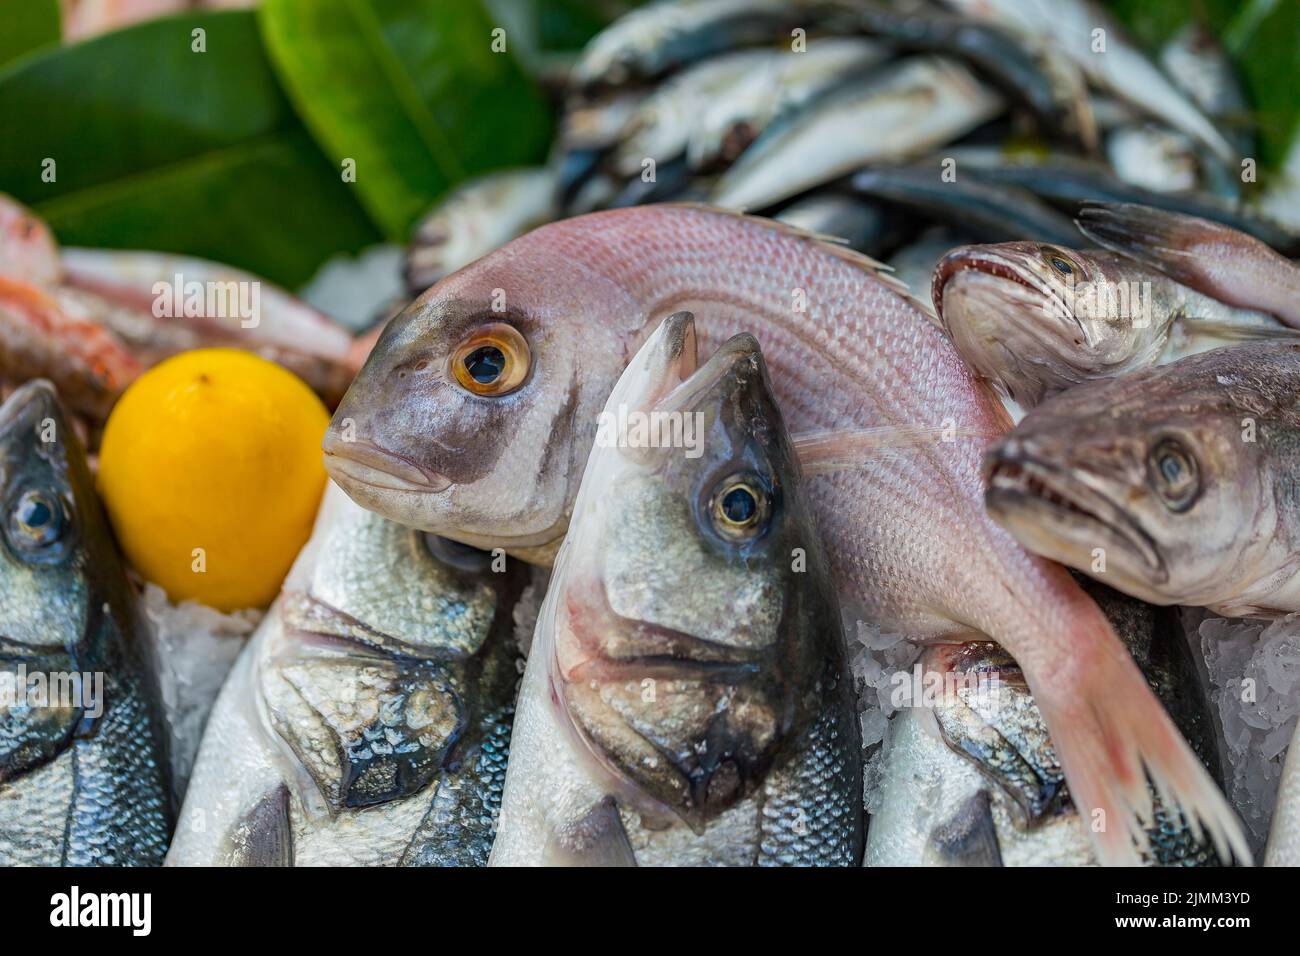 A variety of fish on the market stall Stock Photo